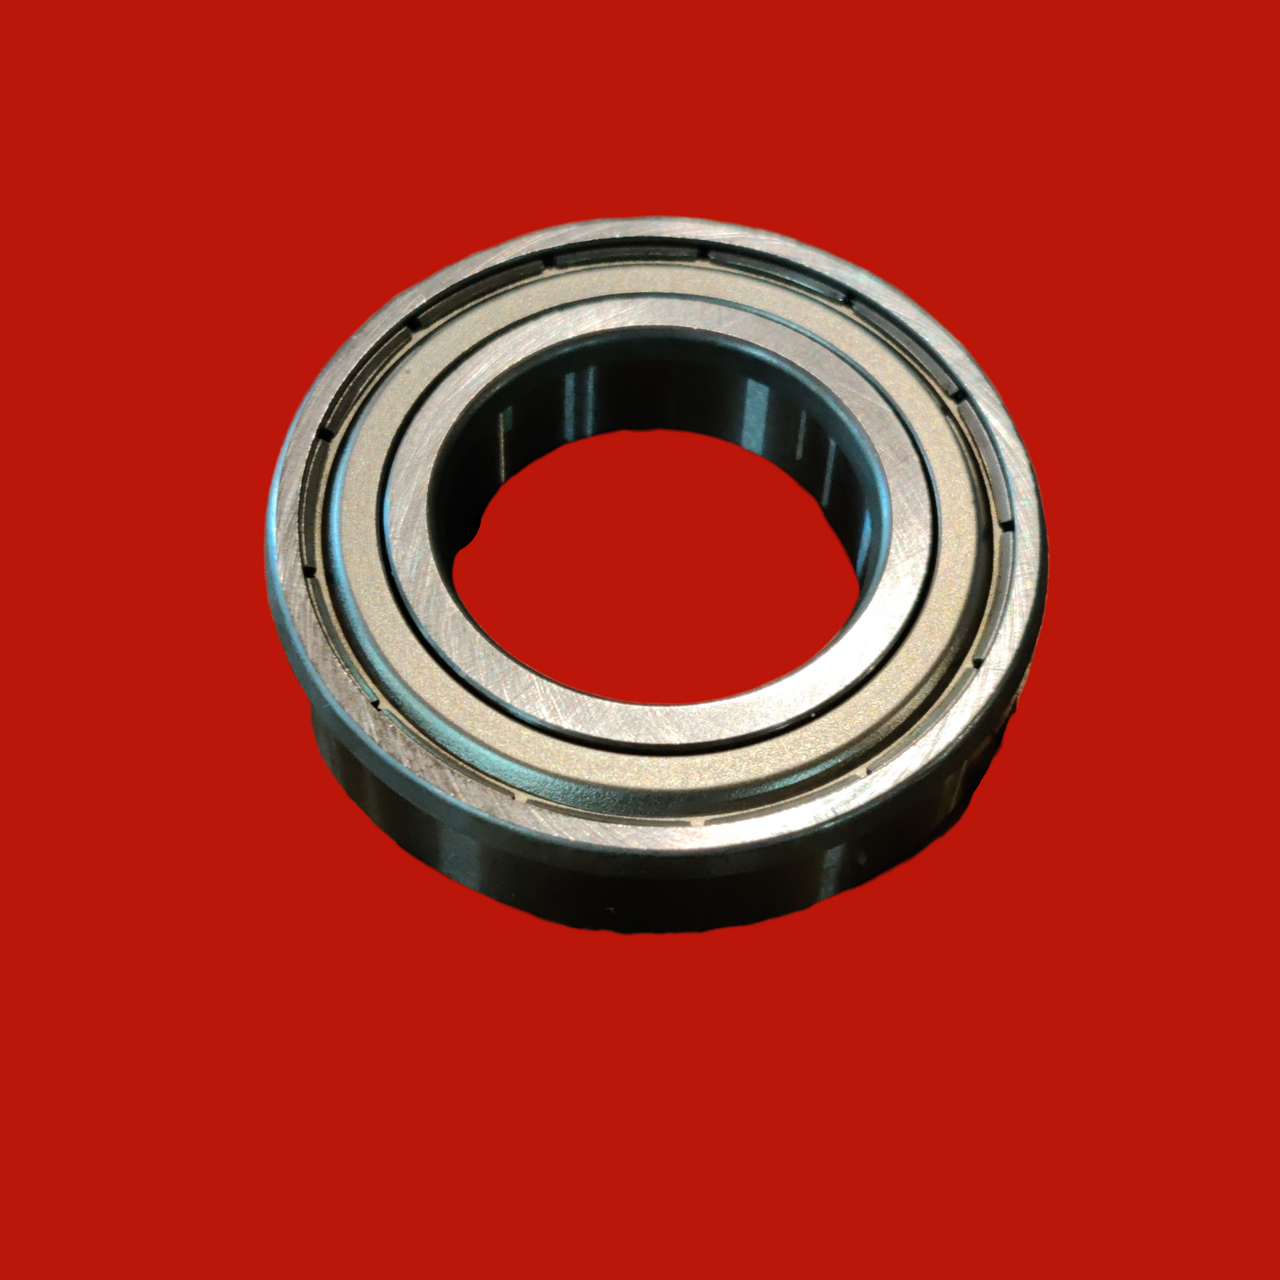 ORS 6006C3 11/6 Single Row Ball Bearing, 30mm Bore, 55mm OD, 13mm Thick